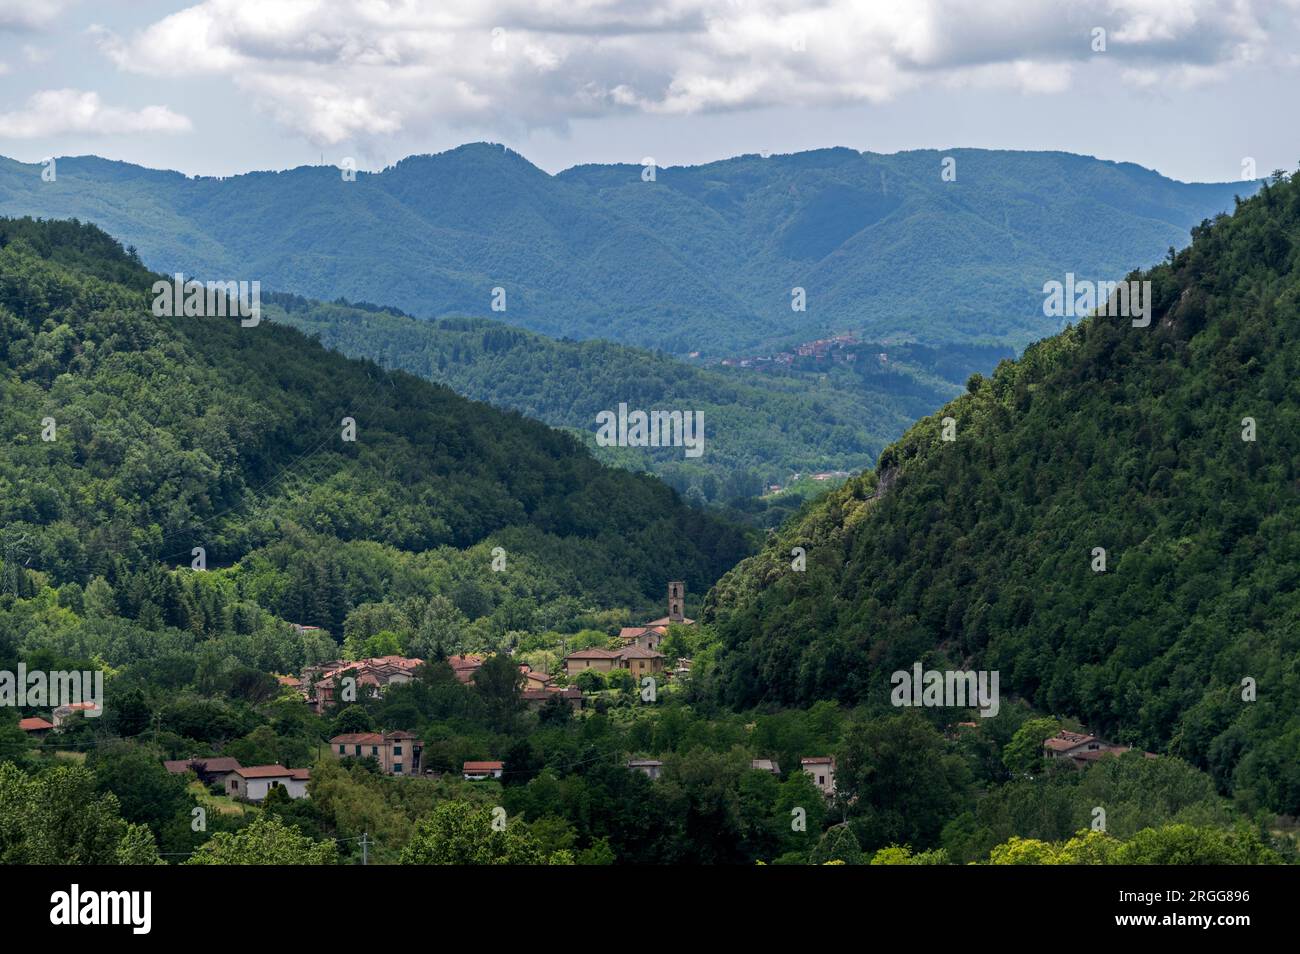 Surrounded by steep wooded mountain slopes and on the valley floor of Valle Ombrosa (Shady Valley) with olive groves and farming is the hamlet of Posa Stock Photo